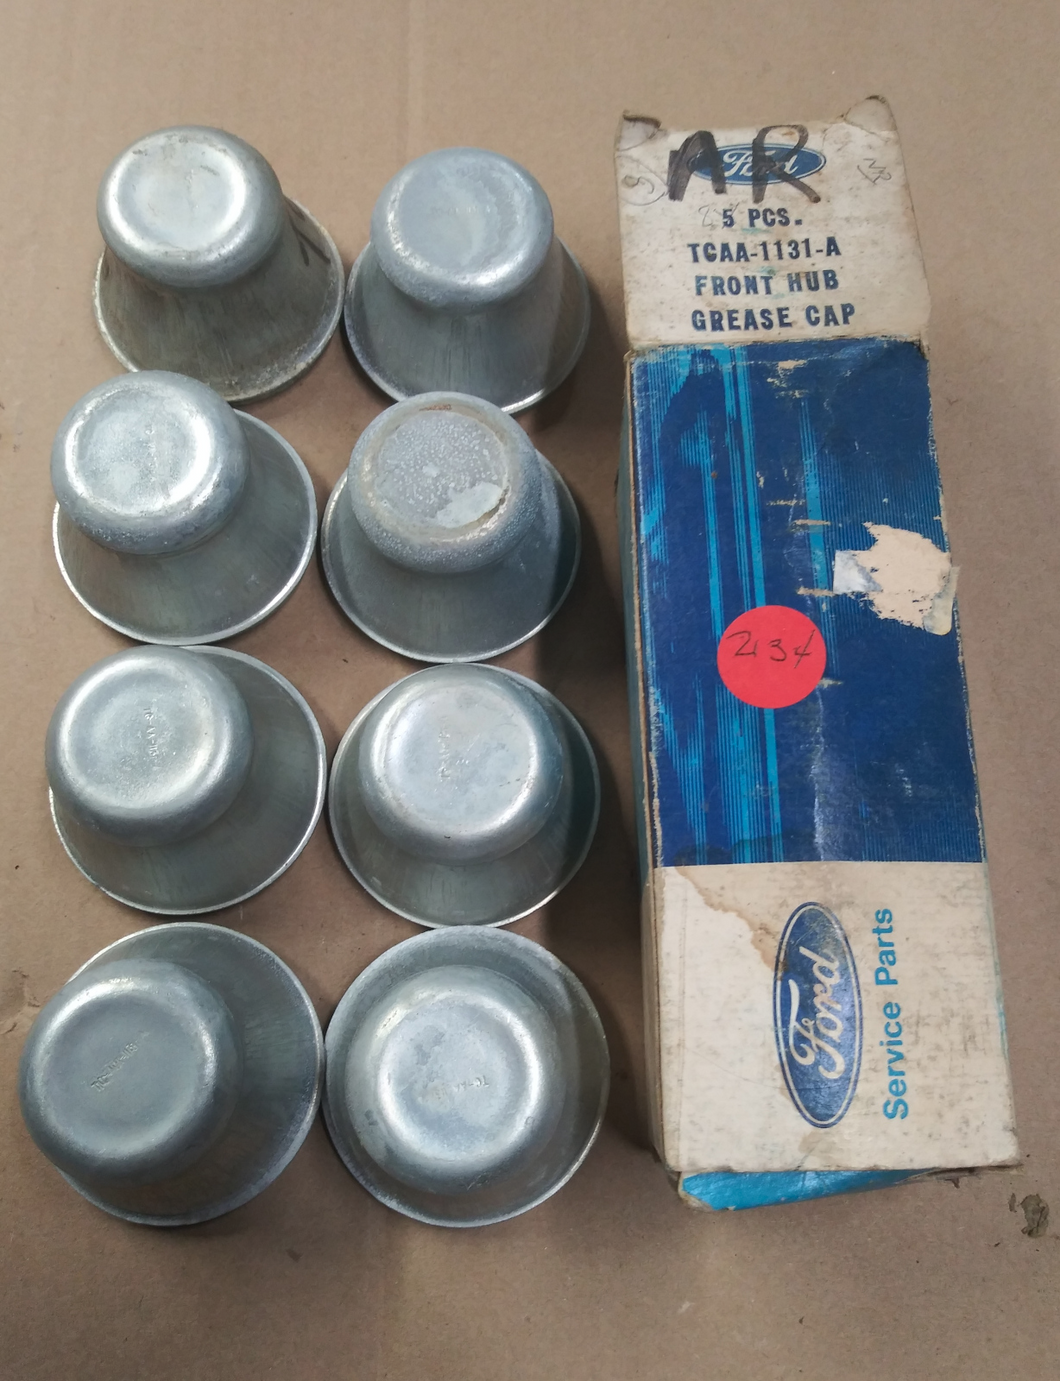 Ford Truck front hub grease caps 8 count NOS